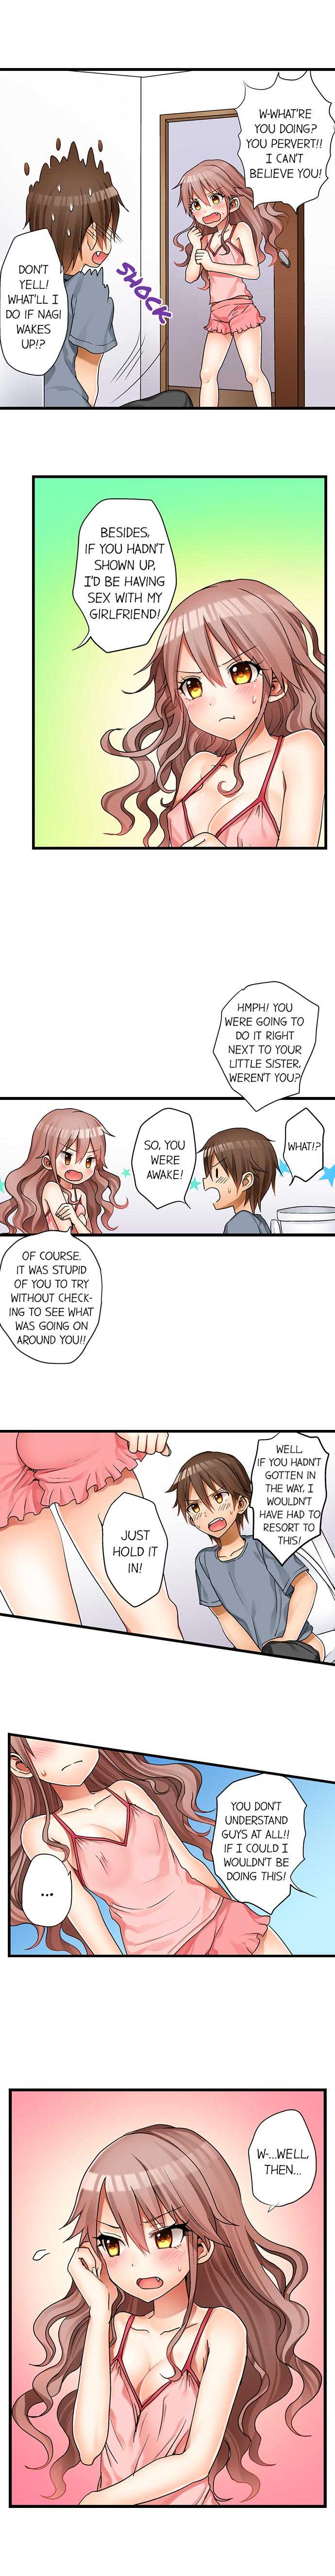 [Porori] Hatsuecchi no Aite wa... Imouto!? | My First Time is with.... My Little Sister?! Ch. 1-66 [English] [Ongoing] - Page 23